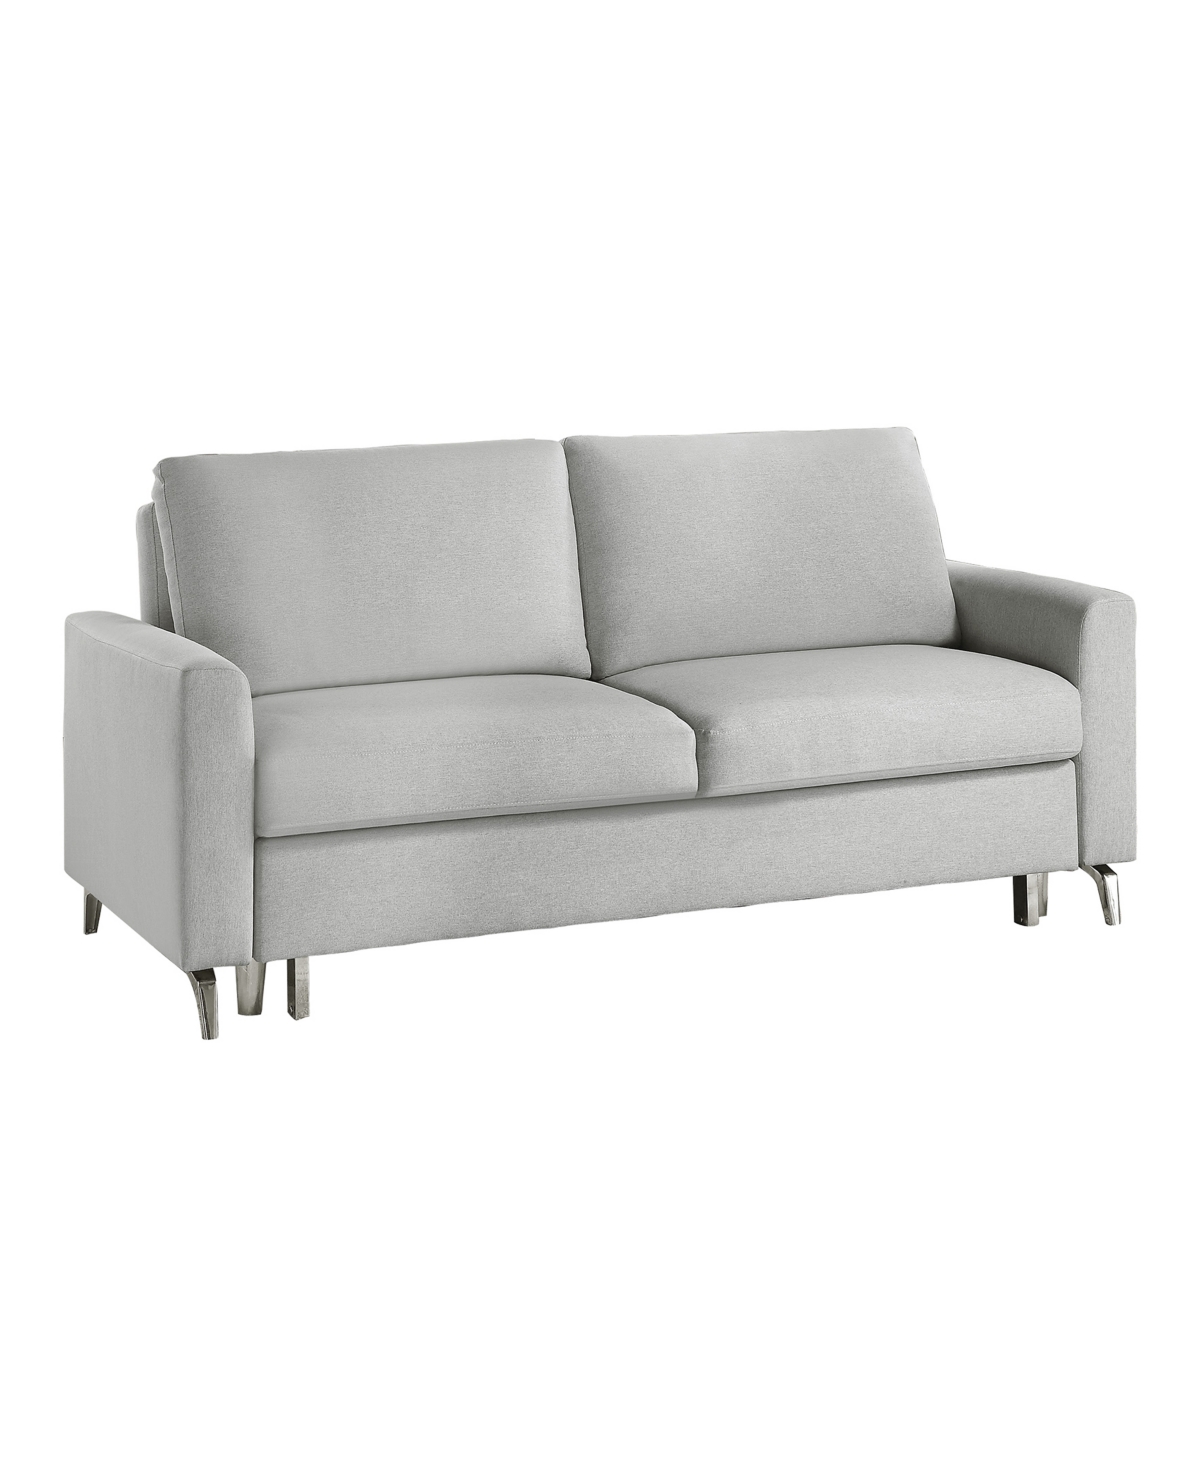 Homelegance White Label Aragon 77" Convertible Studio Sofa With Pull-out Bed In Gray